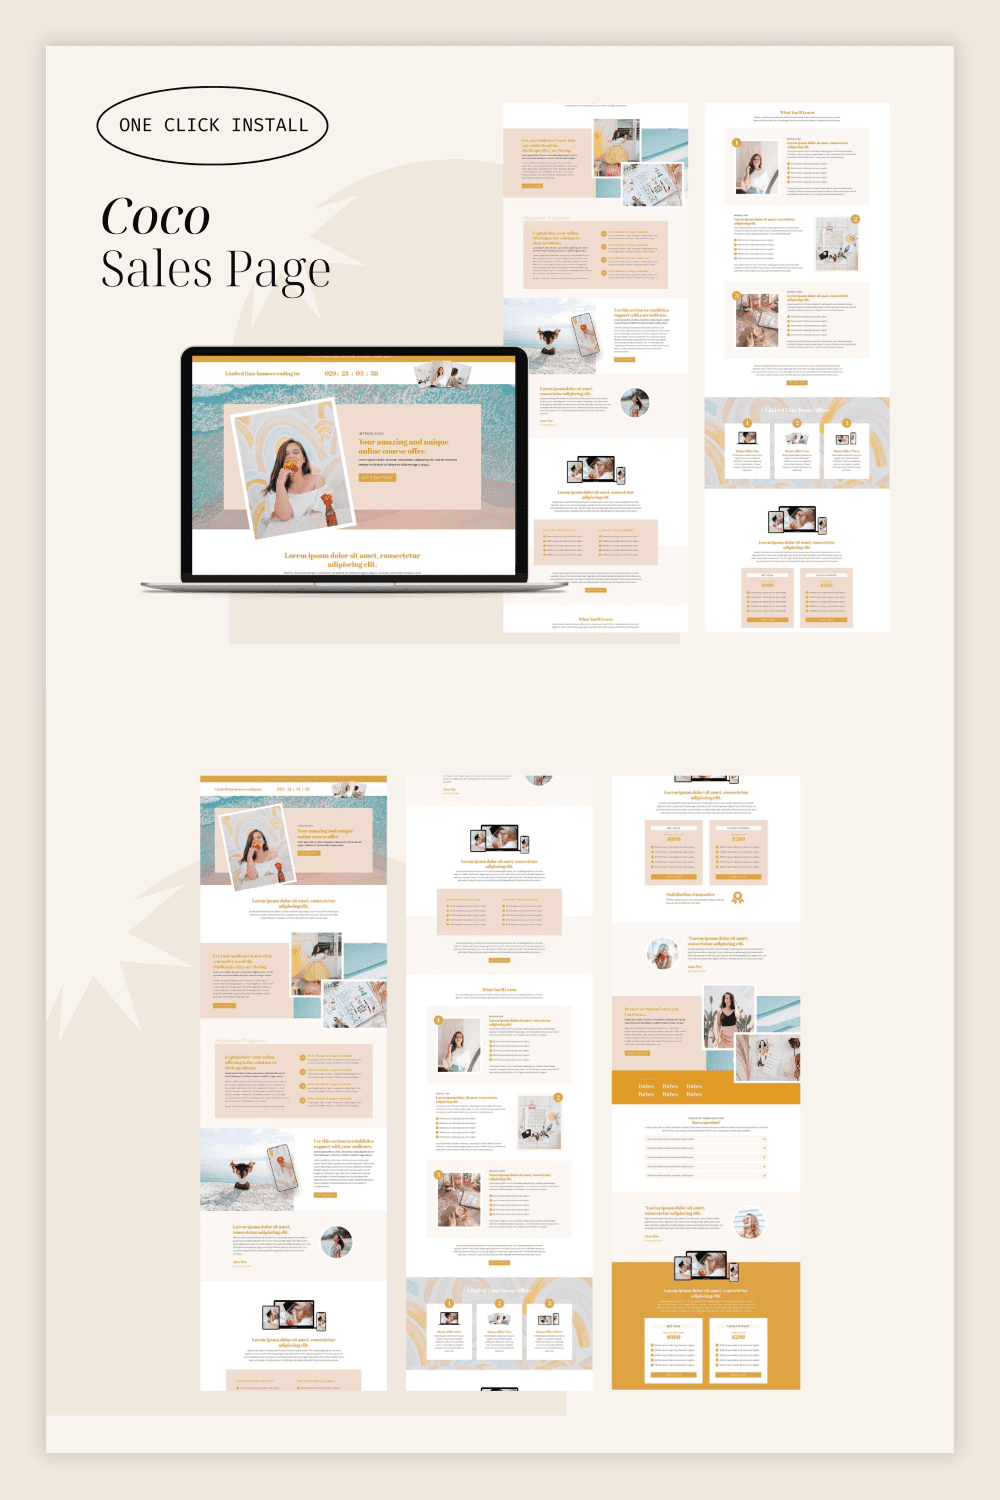 Collage of landing page screenshots in brown and white colors.